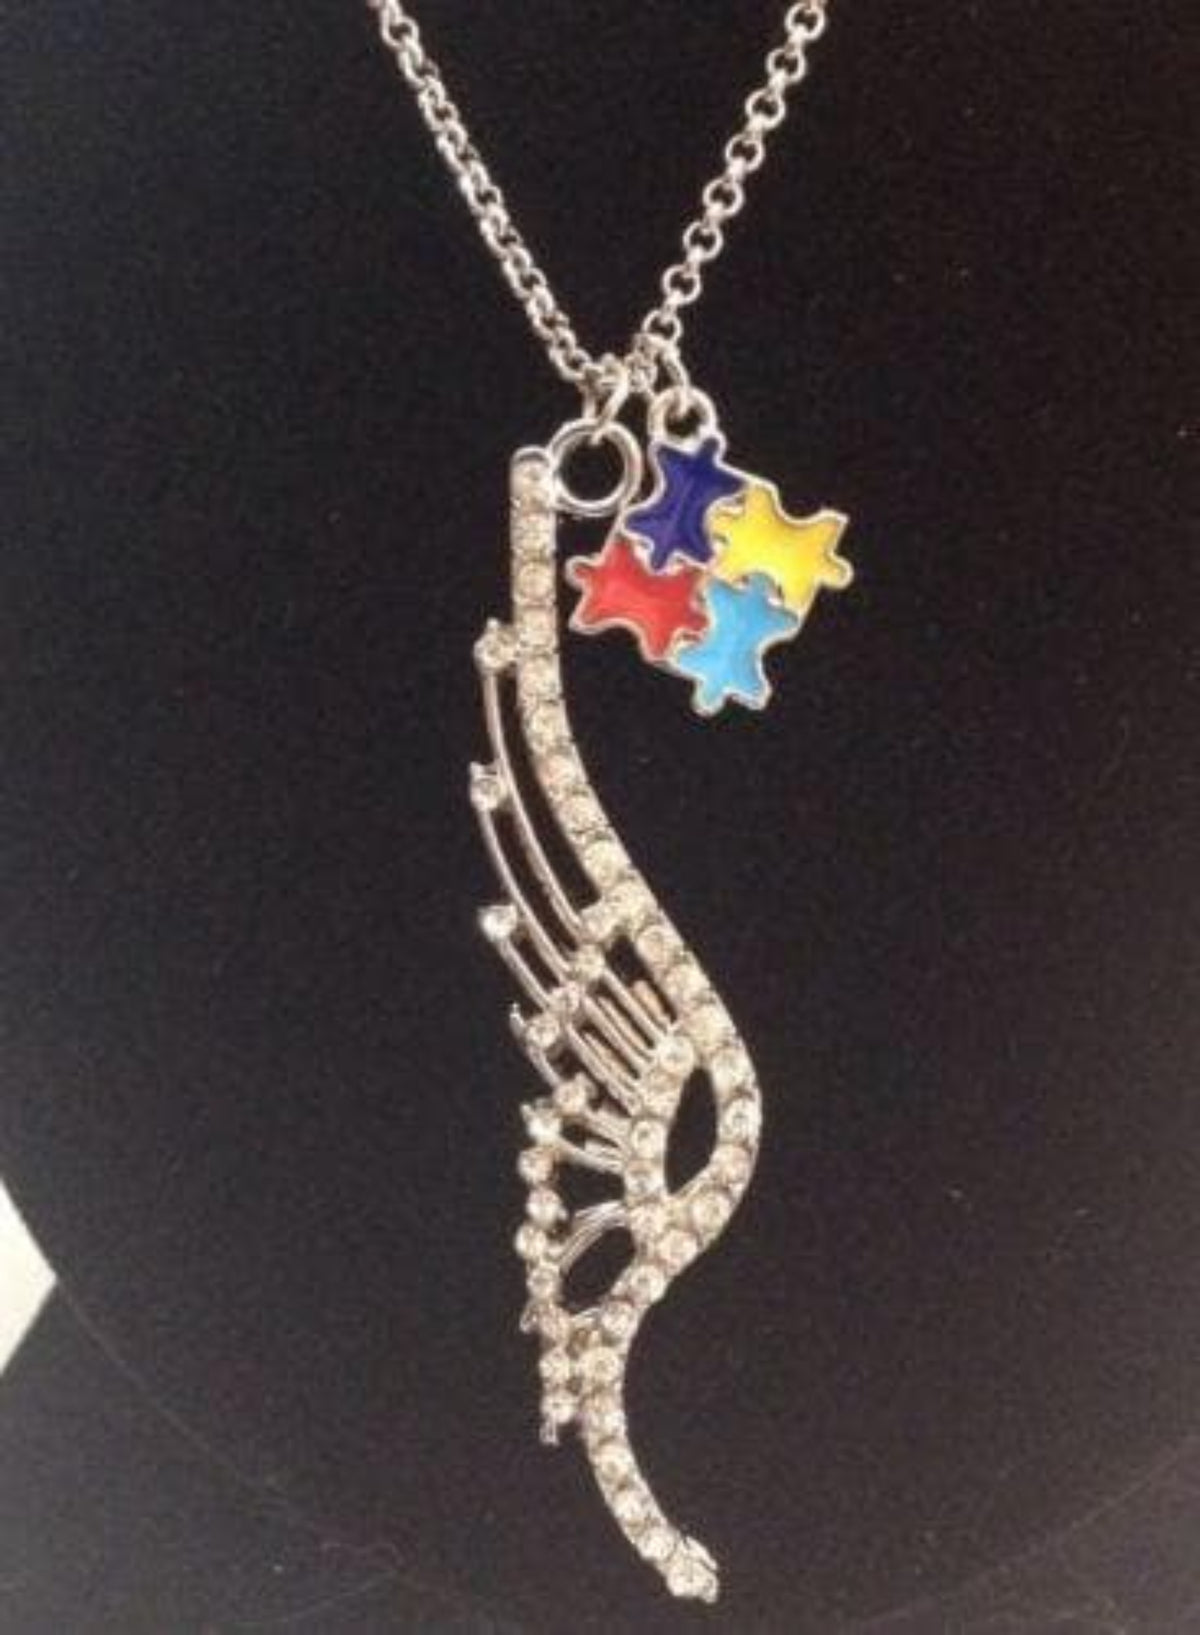 Crystal Angel Wing Charm with Ribbons for Autism Charm Necklace - The House of Awareness